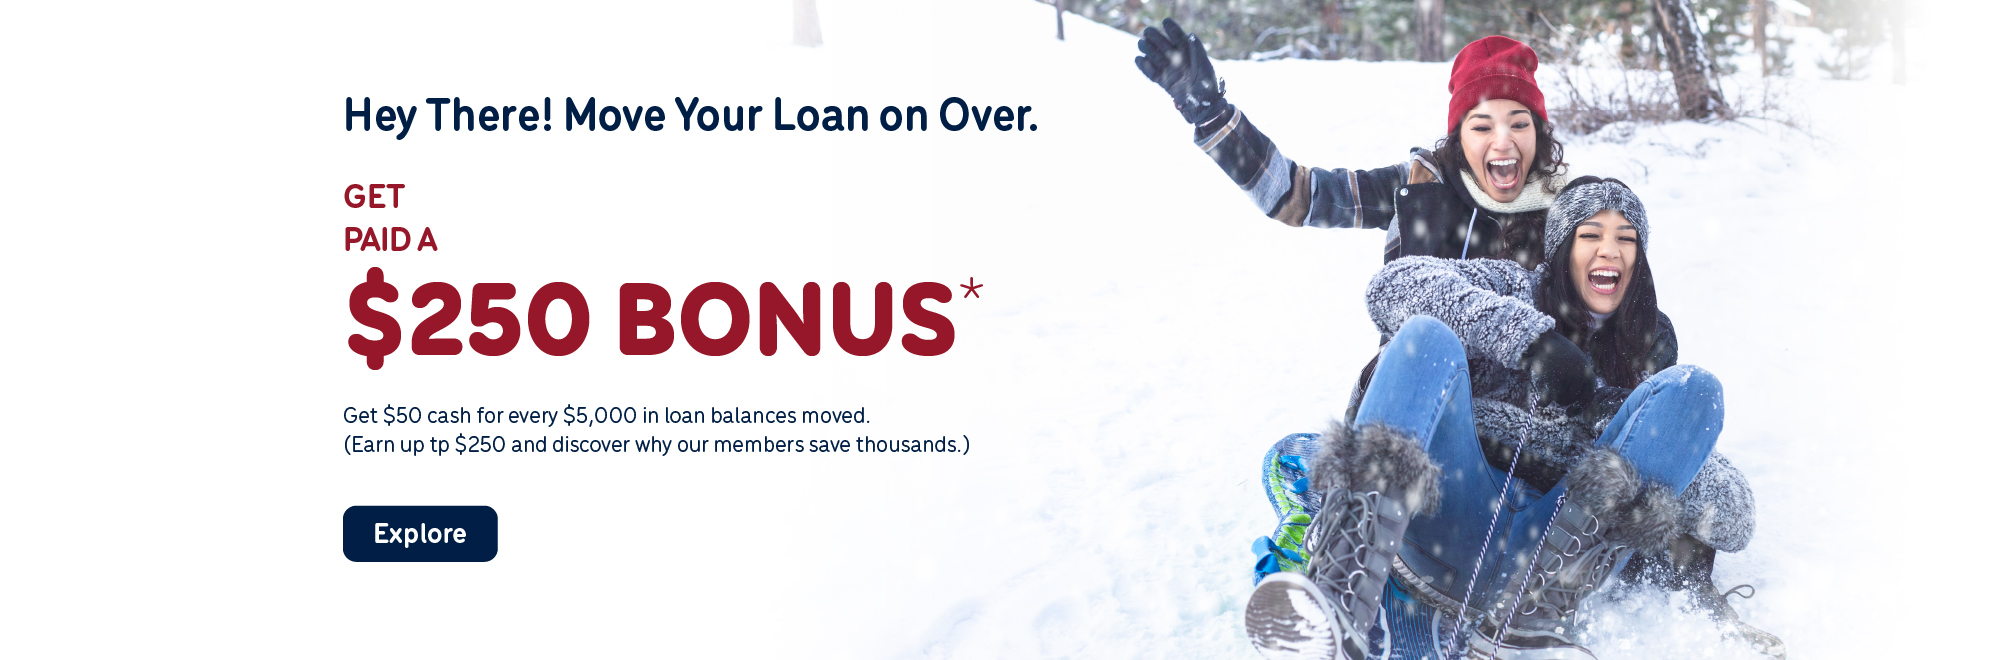 Get paid a $250 Bonus* when you move your loan on over to us!